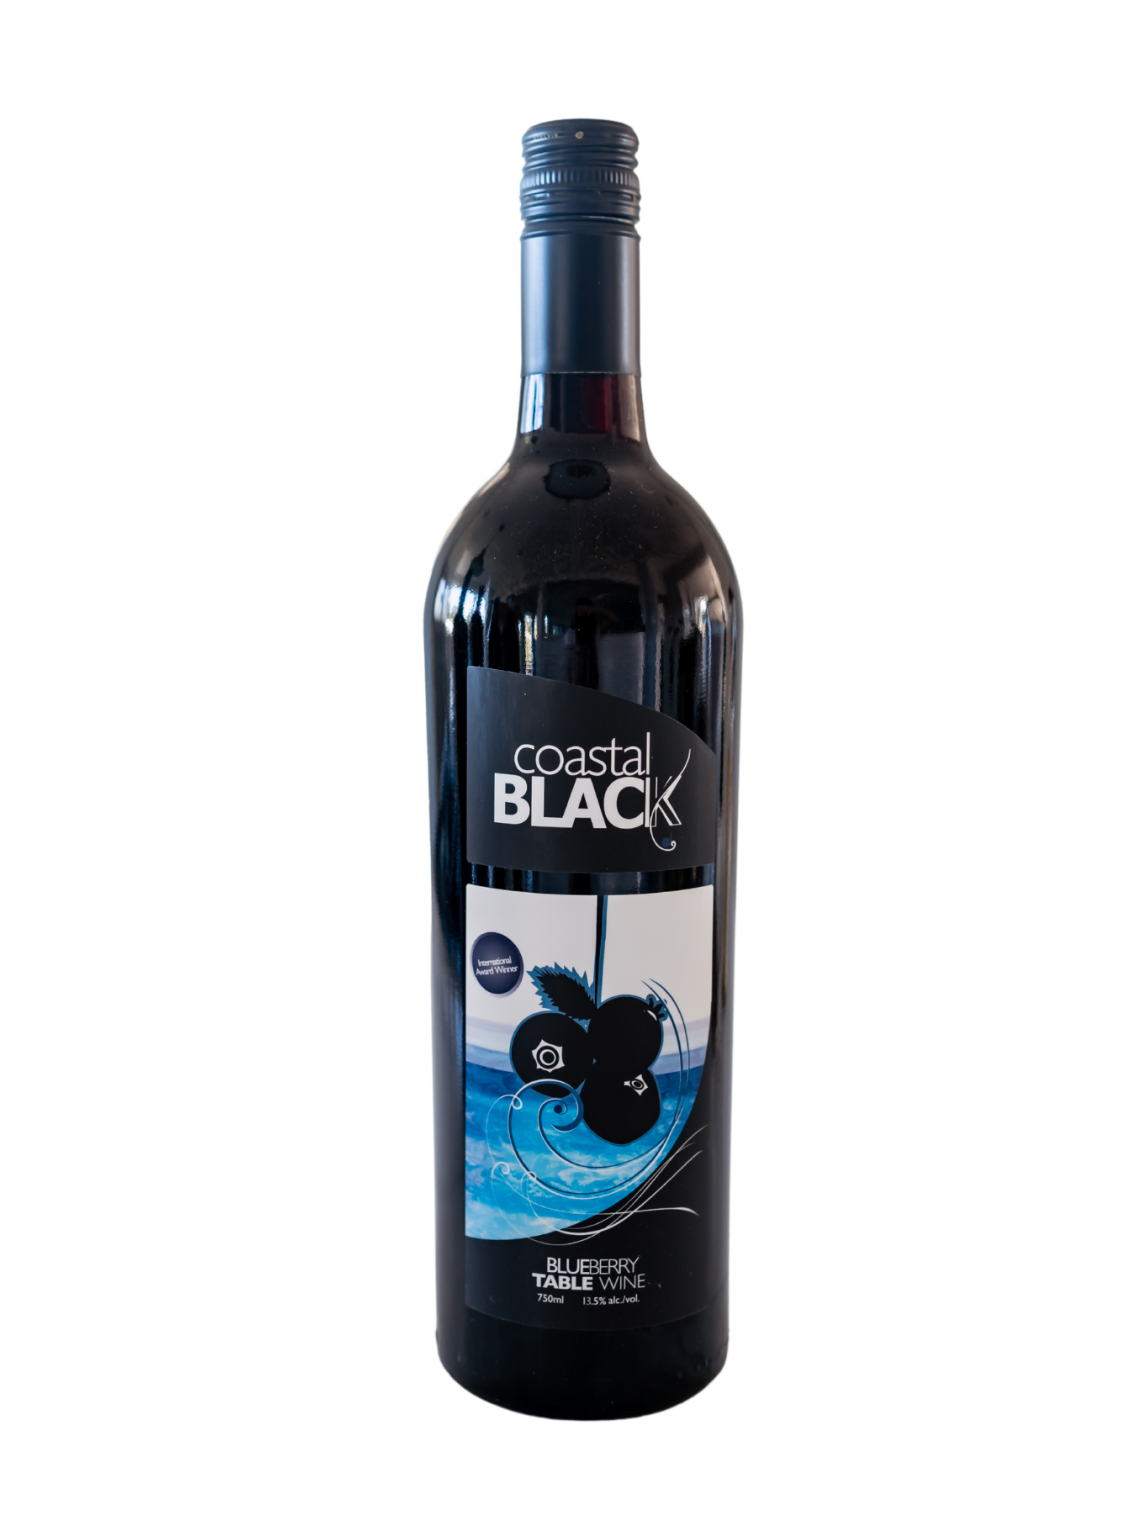 Blueberry table wine made in the comox valley 